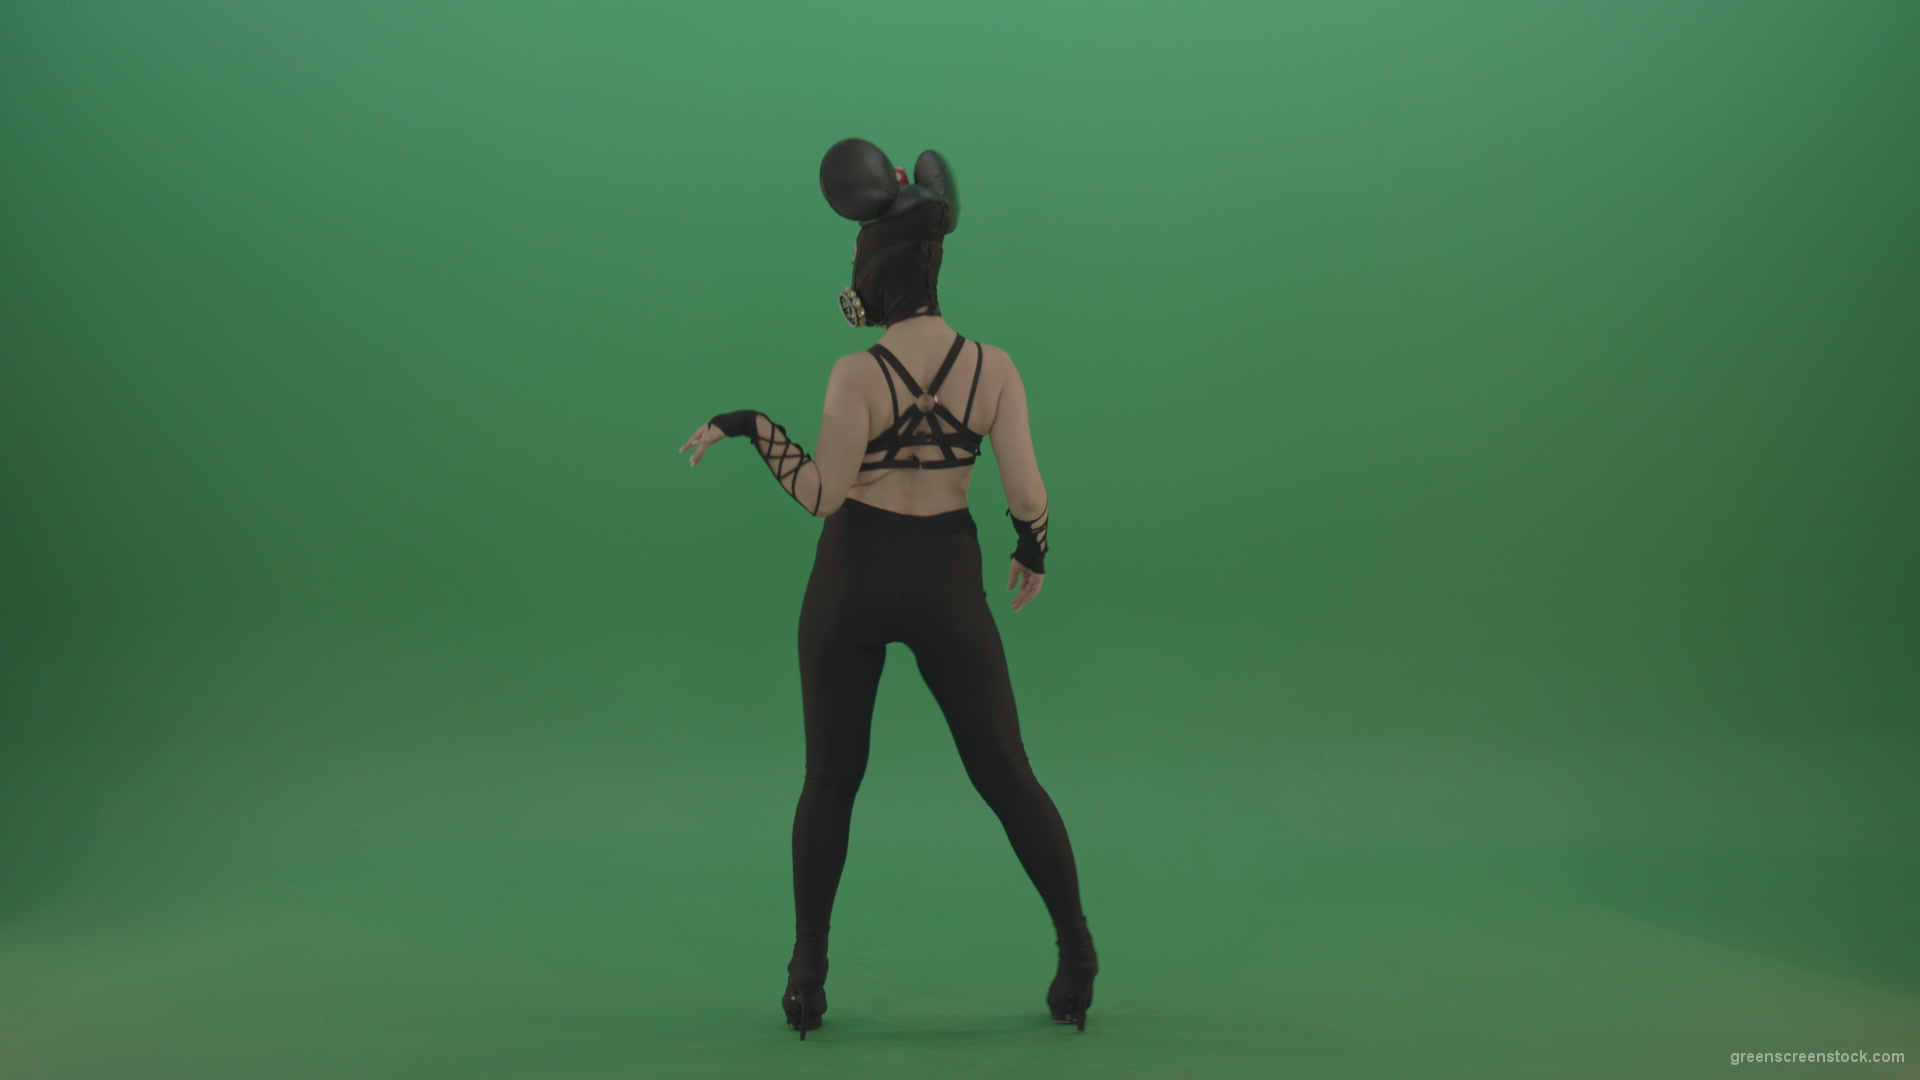 Mouse-Girl-in-mask-dancing-go-go-shaking-ass-and-posing-on-green-screen_004 Green Screen Stock